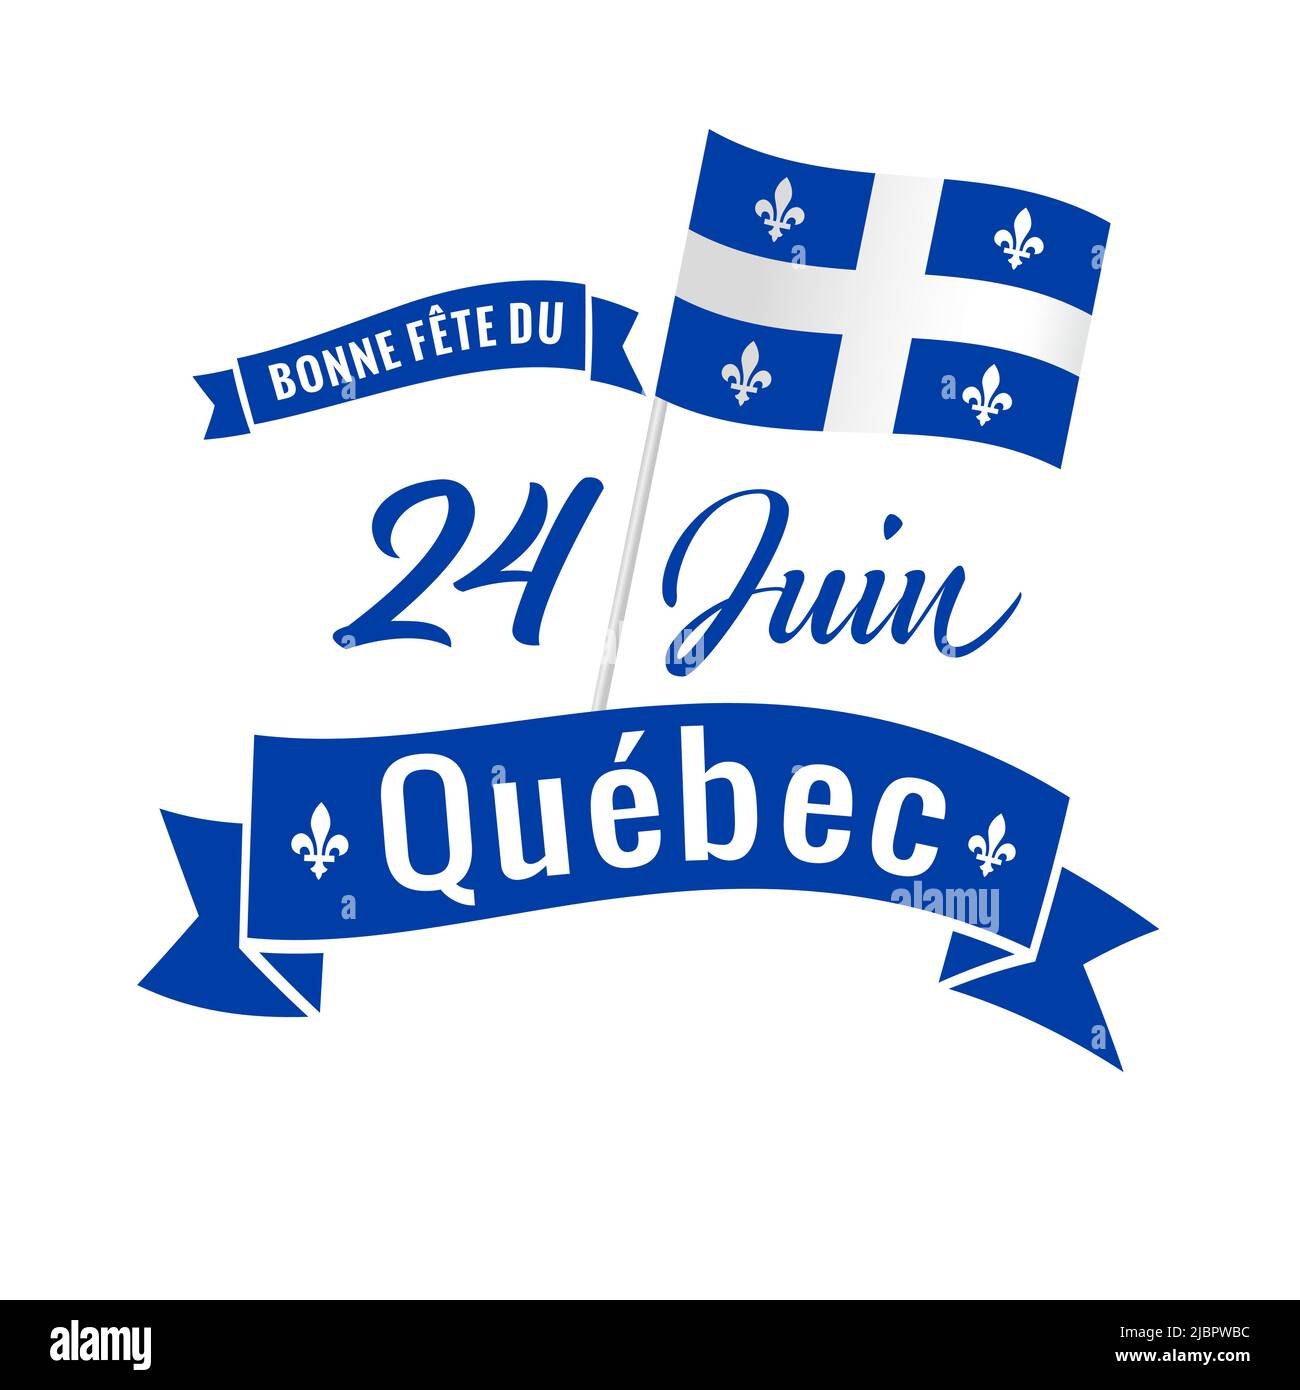 Bonne fete du Quebec, 24 June - french text Happy Quebec Day, June 24. Quebec's National Holiday with vector lettering and flag. St. Jean-Baptiste day Stock Vector